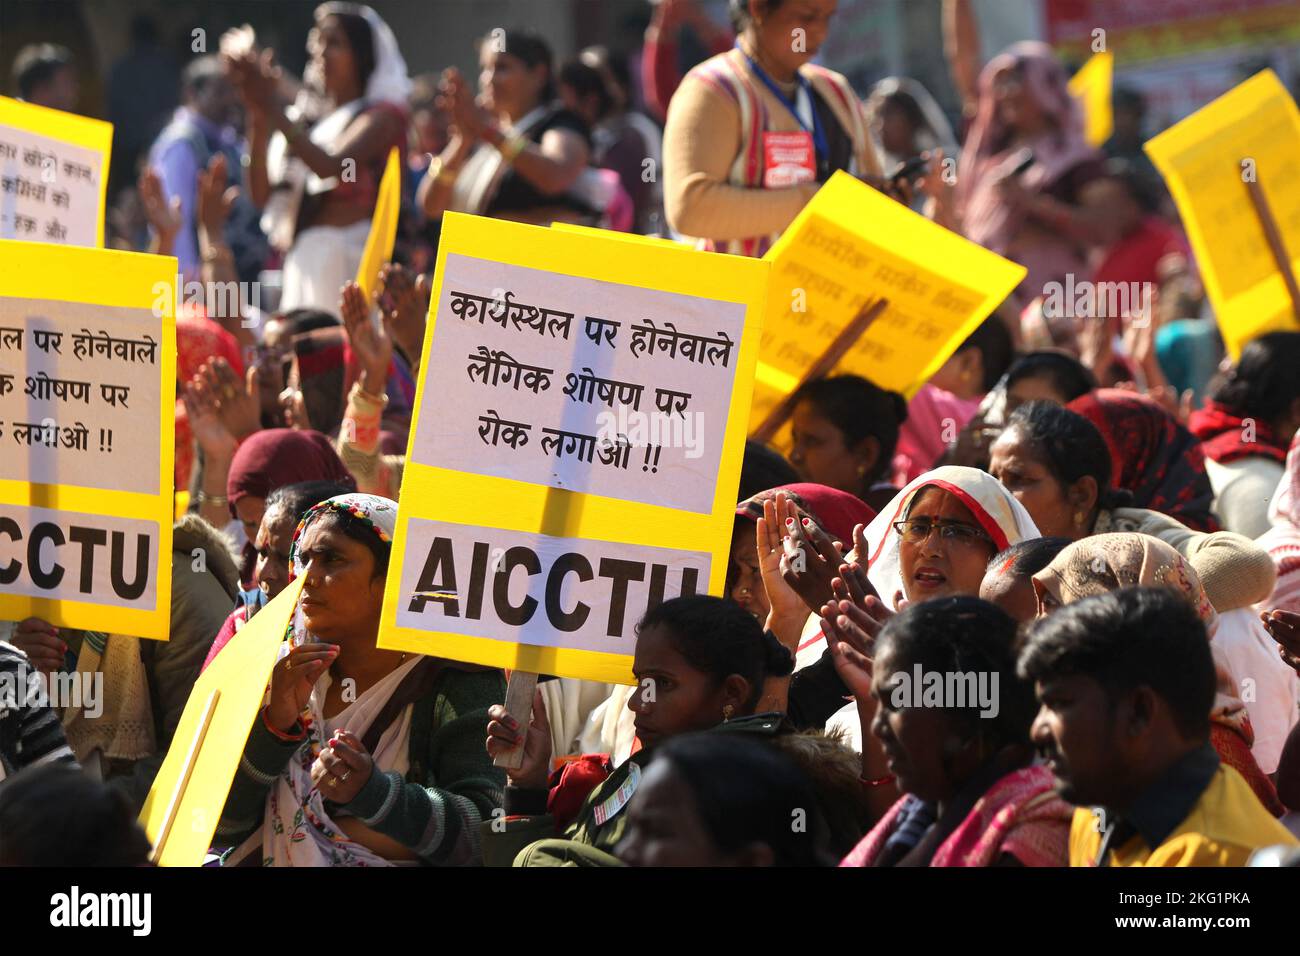 All-India Central Council of Trade Unions (AICCTU) under a nationwide campaign to ensure justice and dignity for India’s Scheme workers, ASHA (Accredited Social Health Activist), Mid-day Meal, Anganwadi, and other workers, and to demand their constitutional rights in the capital to demanding better wages and facilities during a demonstration in New Delhi on November 21, 2022. Photo by Anshuman Akash/ABACAPRESS.COM Stock Photo